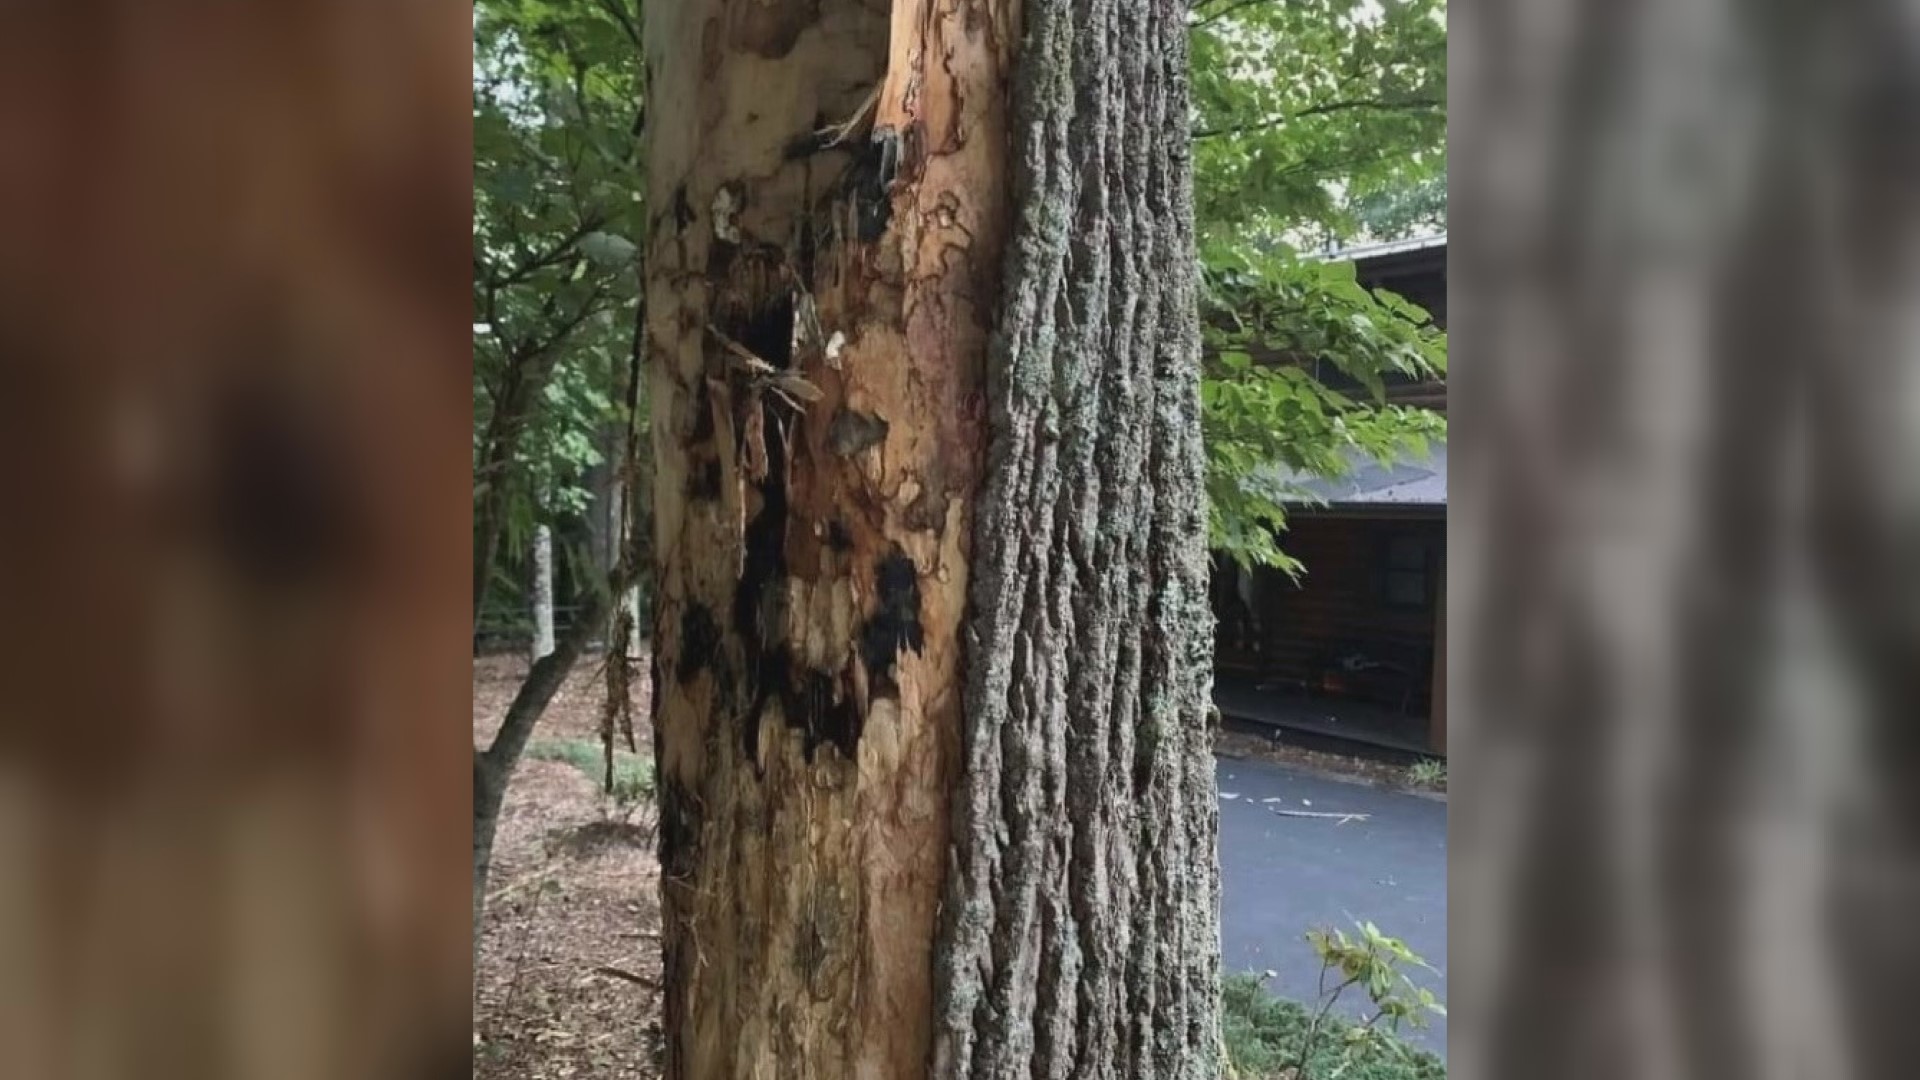 A couple in Wilkes County said lightning hit a tree near their home while they were sitting just 20 feet away and they caught it on camera.